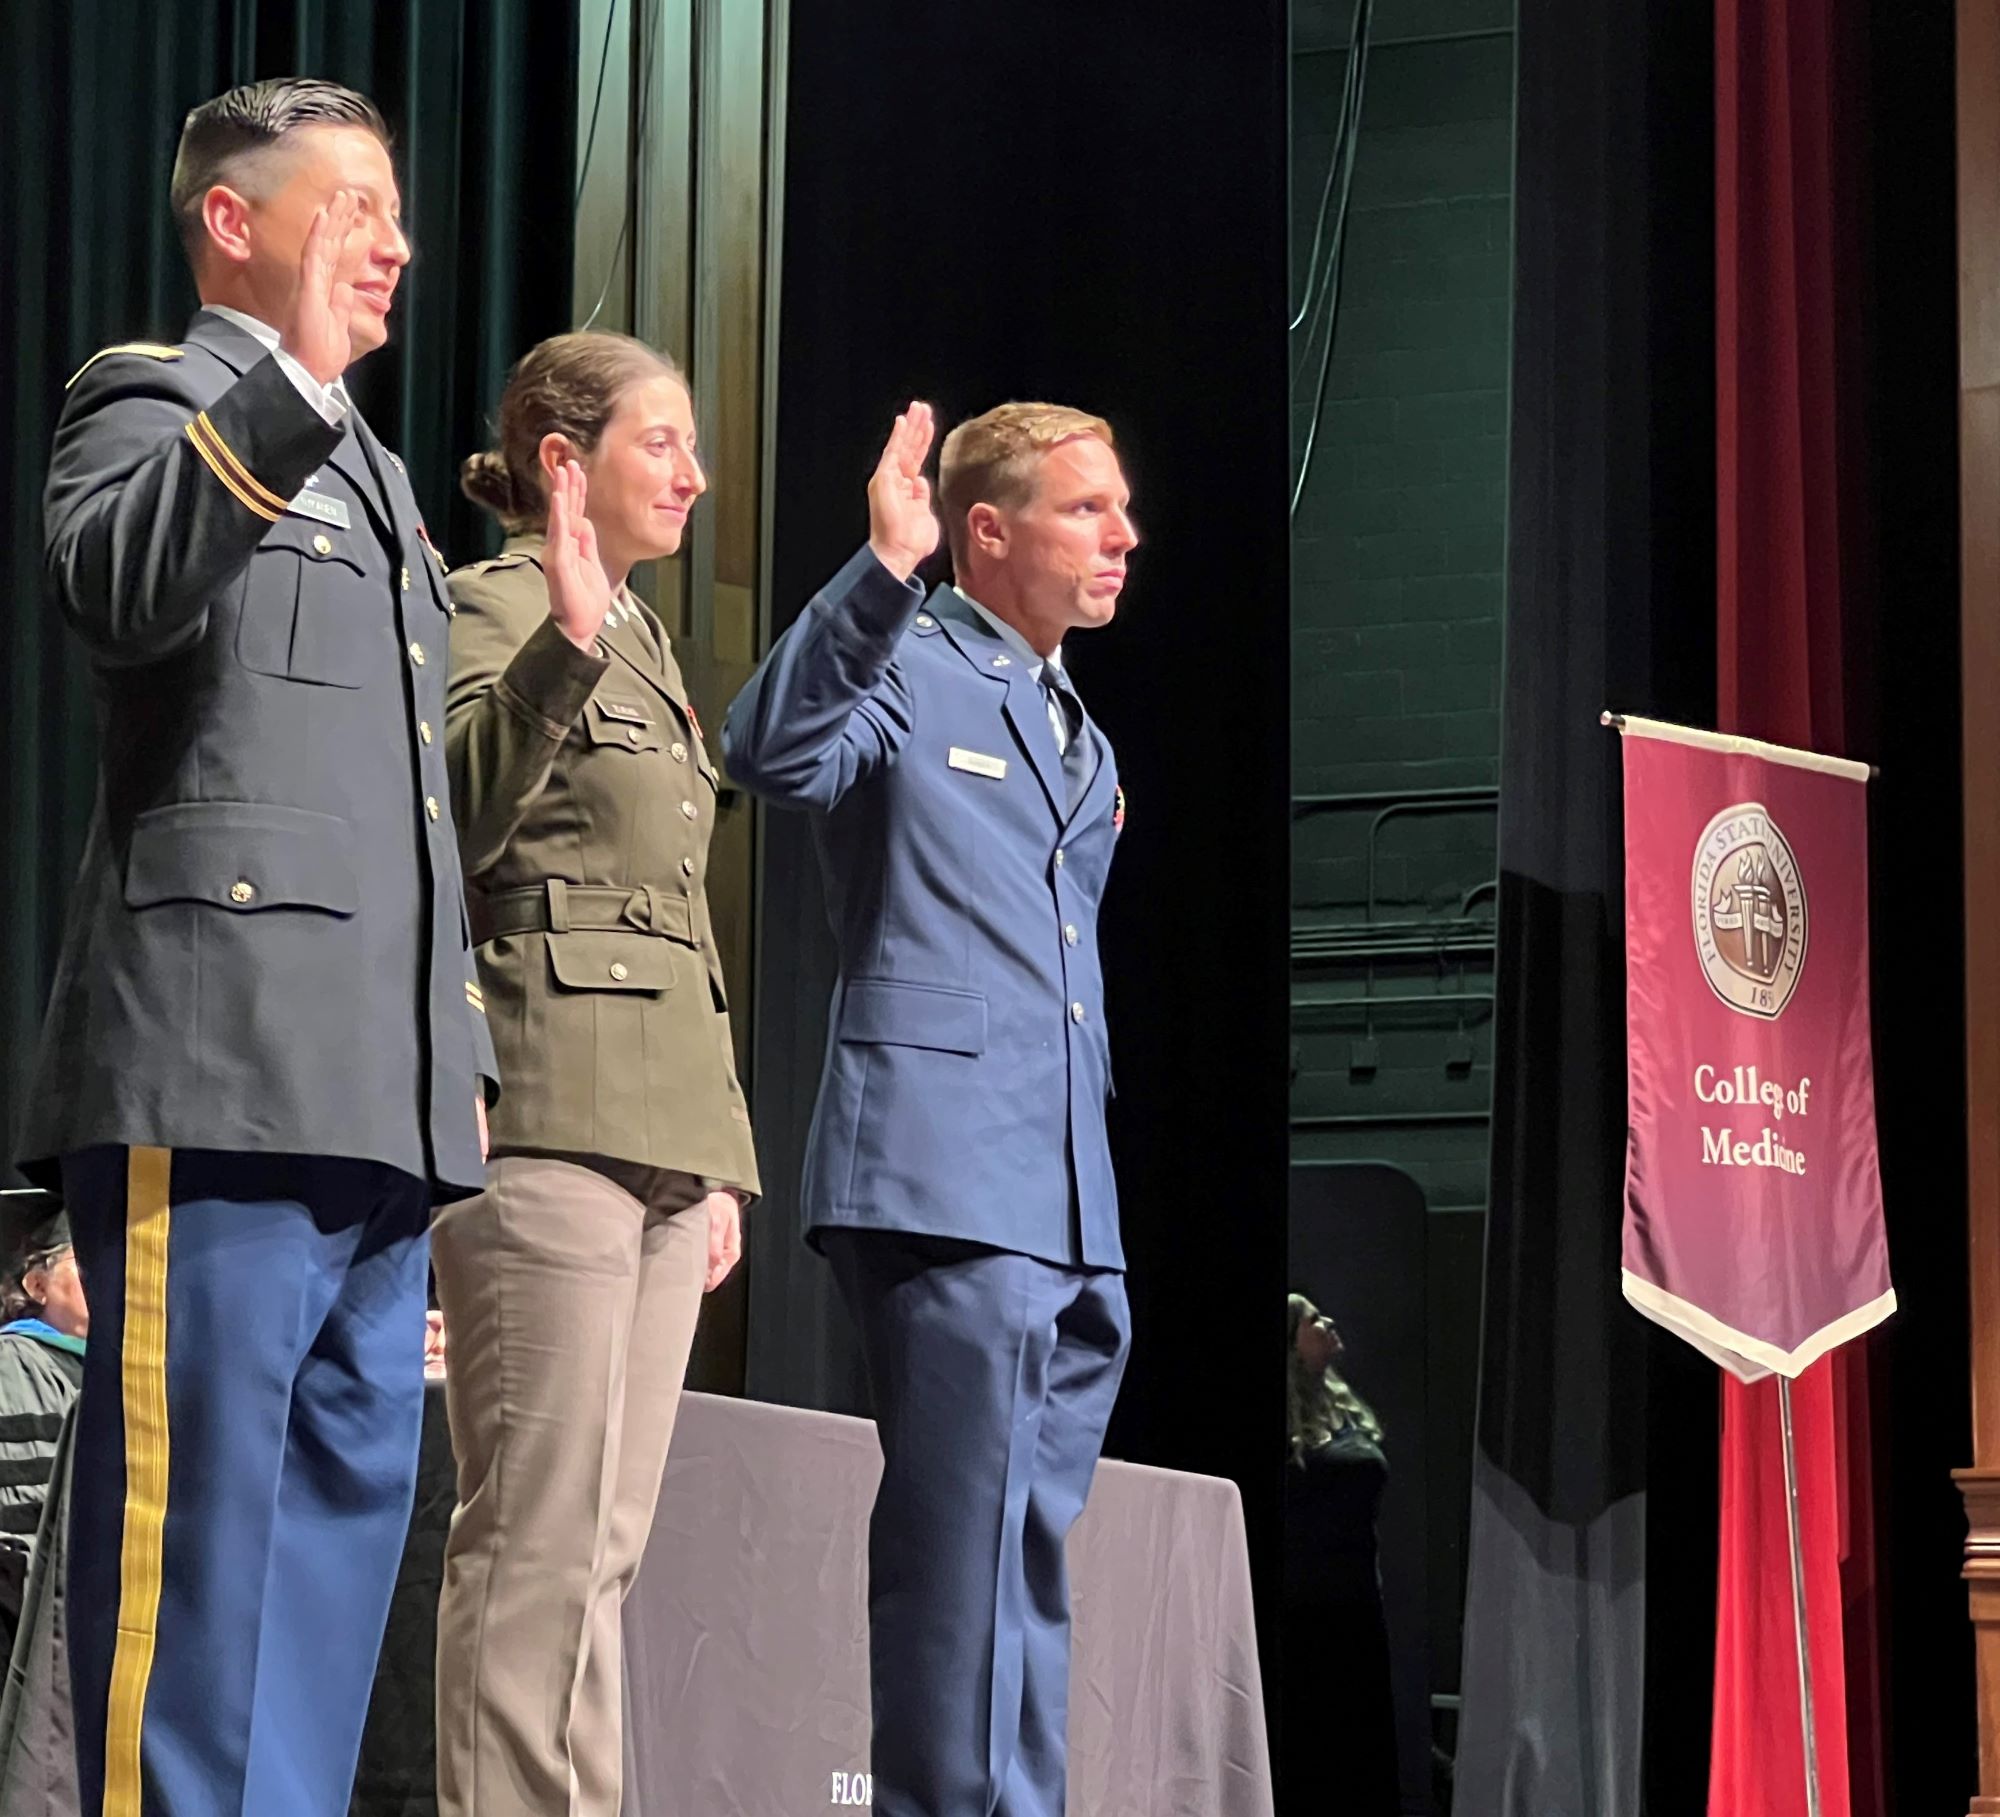 Dr. Jordin Giles Zuelke among the three Dr. Brian Nykanen, Dr. Jordin Giles Zuelke and Dr. Eric Minnix raise their right hands to reaffirm their military oaths of office following their promotions to captain, Nykanen and Zuelke in the Army and Minnix in the Air Force. 